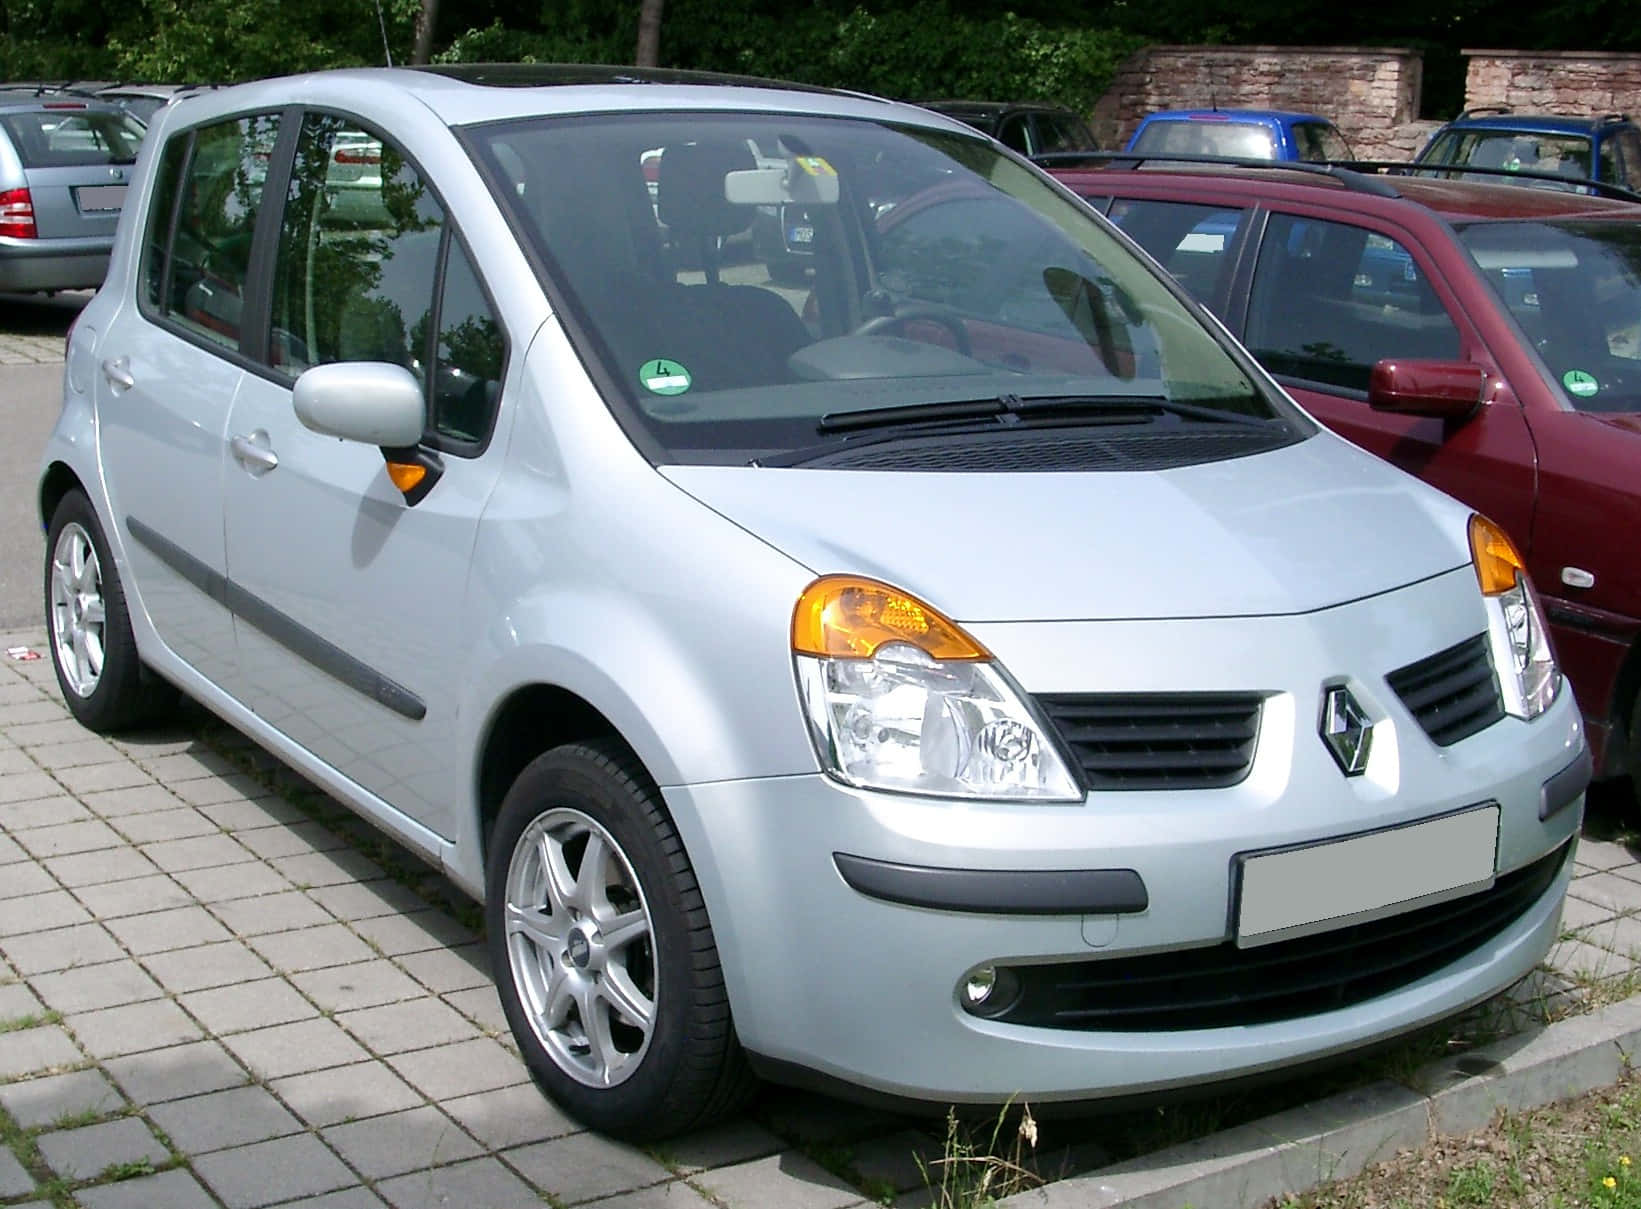 Sleek and Stylish Renault Modus on the Road Wallpaper